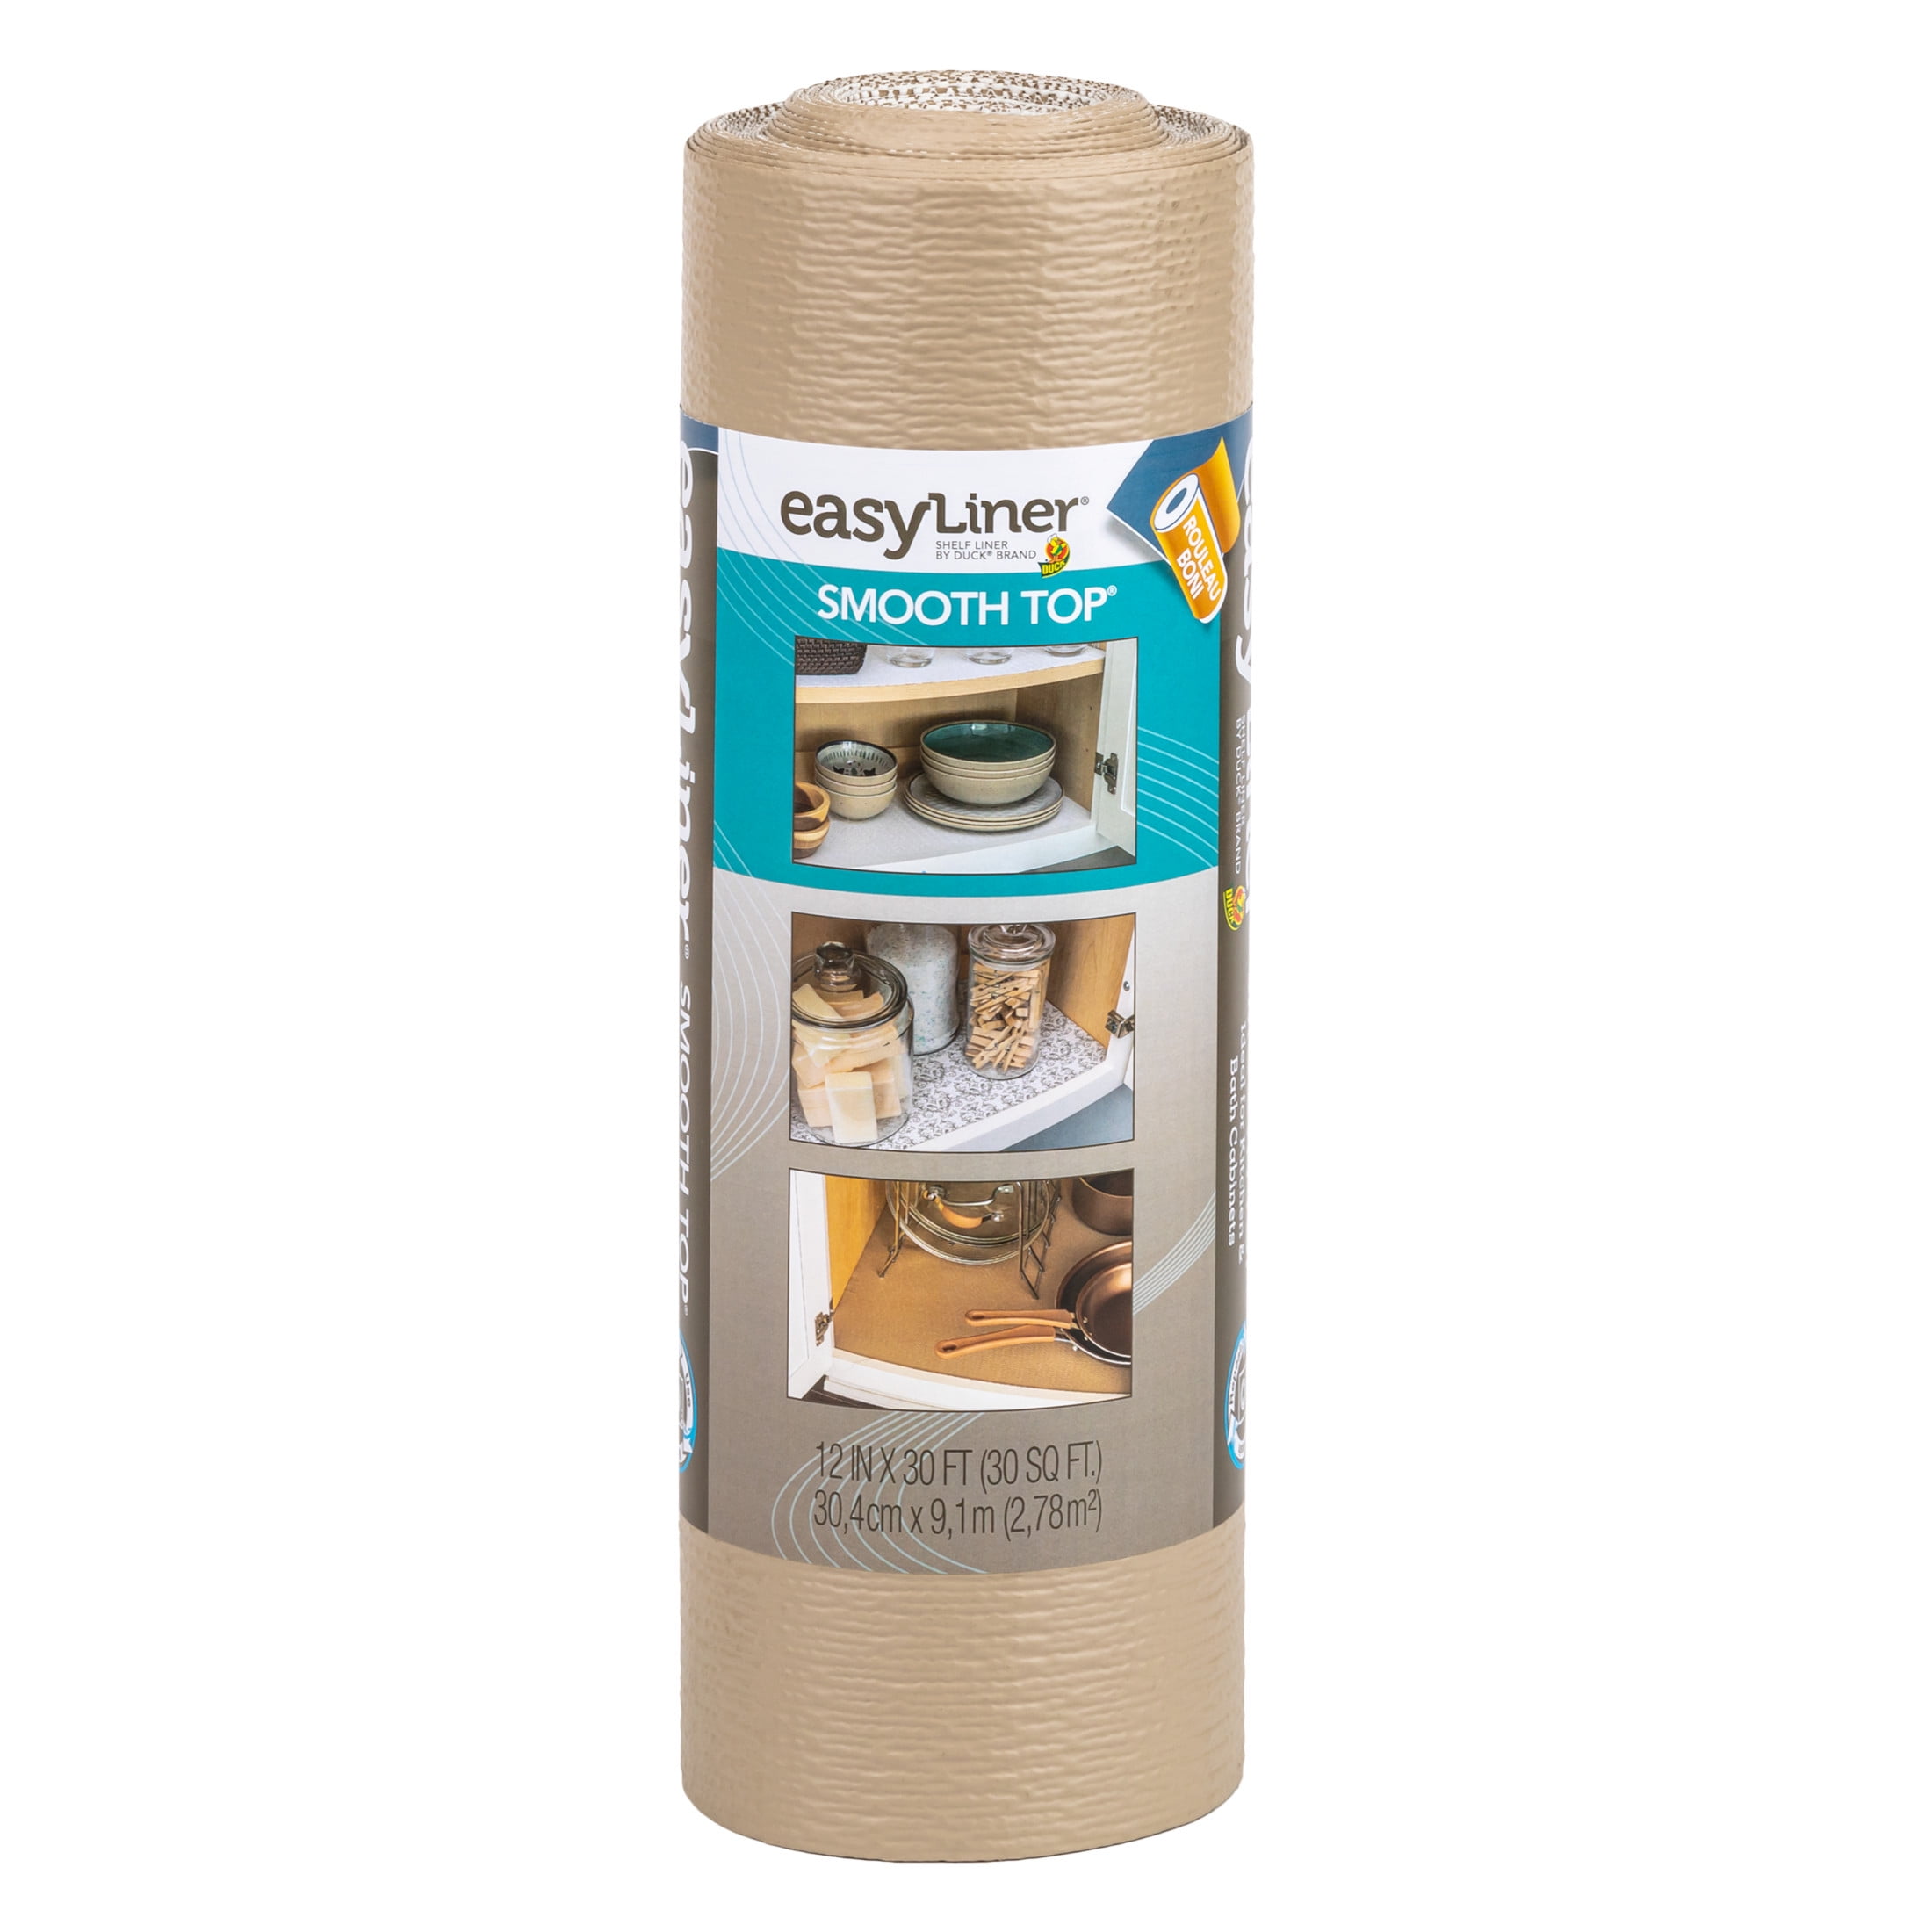 Duck Brand Smooth Top Taupe Shelf Liner, 12 in. x 10 ft